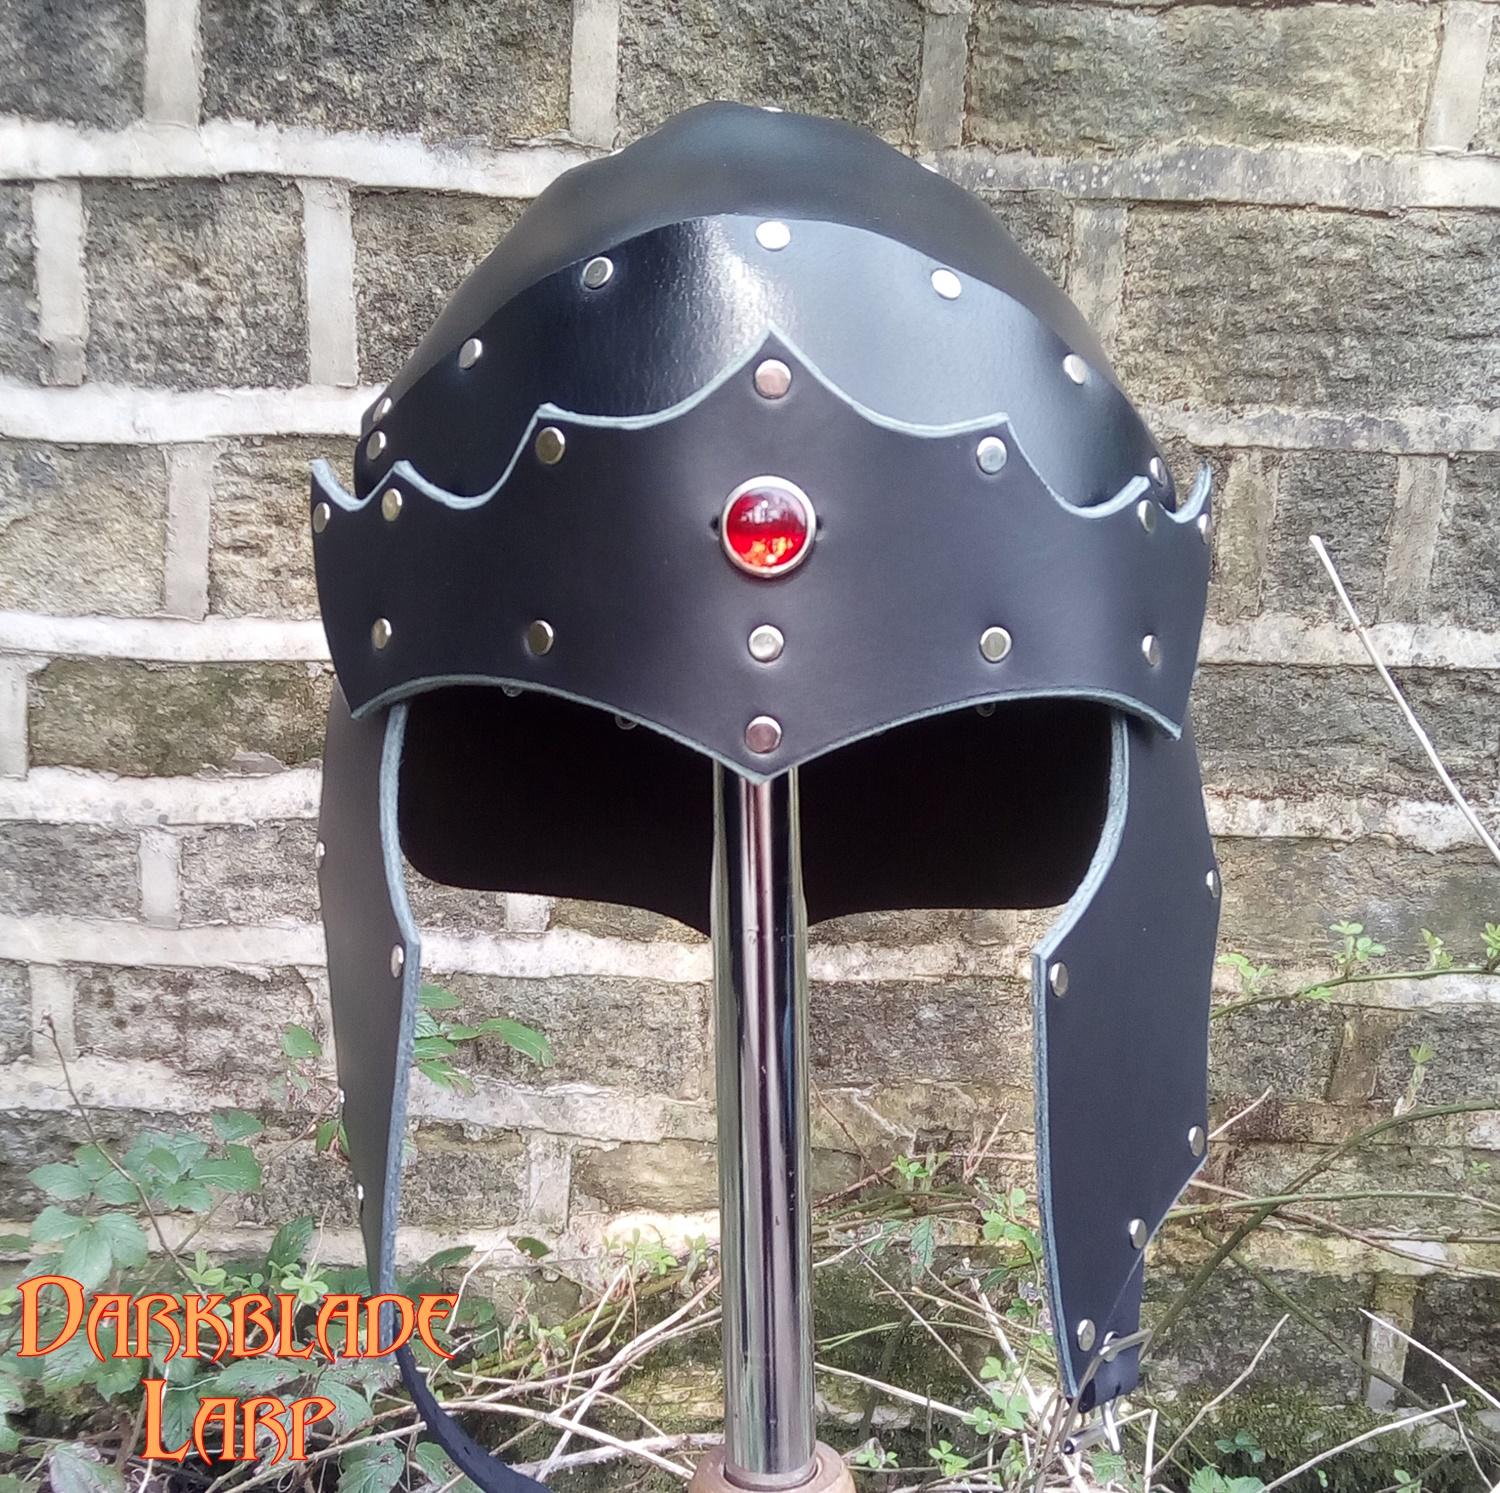 An open face leather helmet. The cheek pieces look like stylised wings